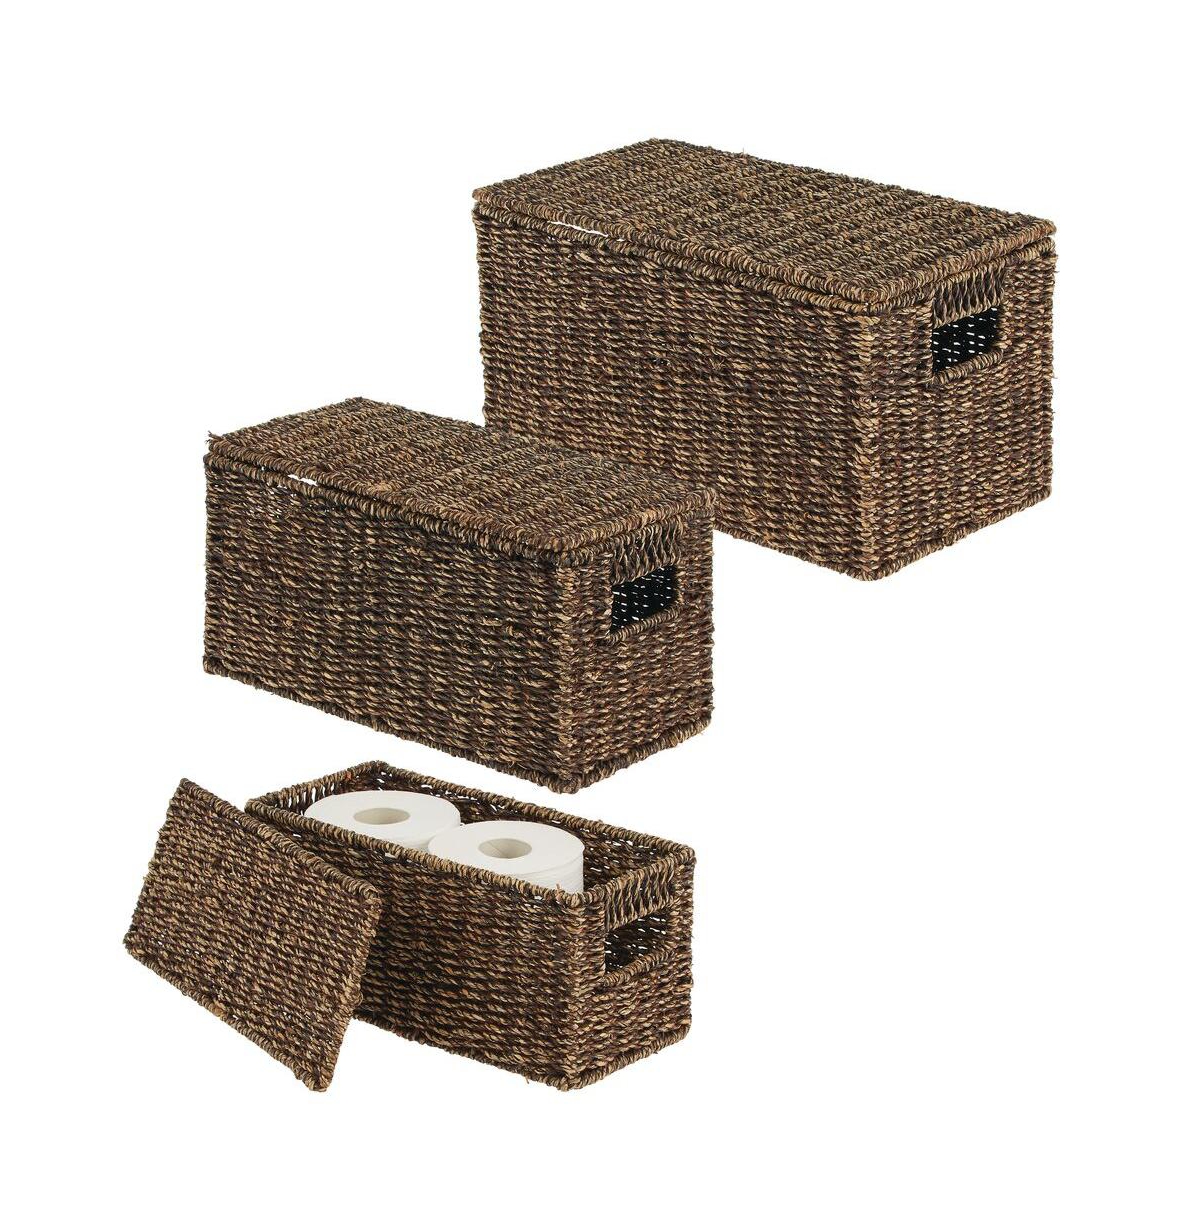 Woven Seagrass Home Storage Basket with Lid, Set of 3 - Dark brown